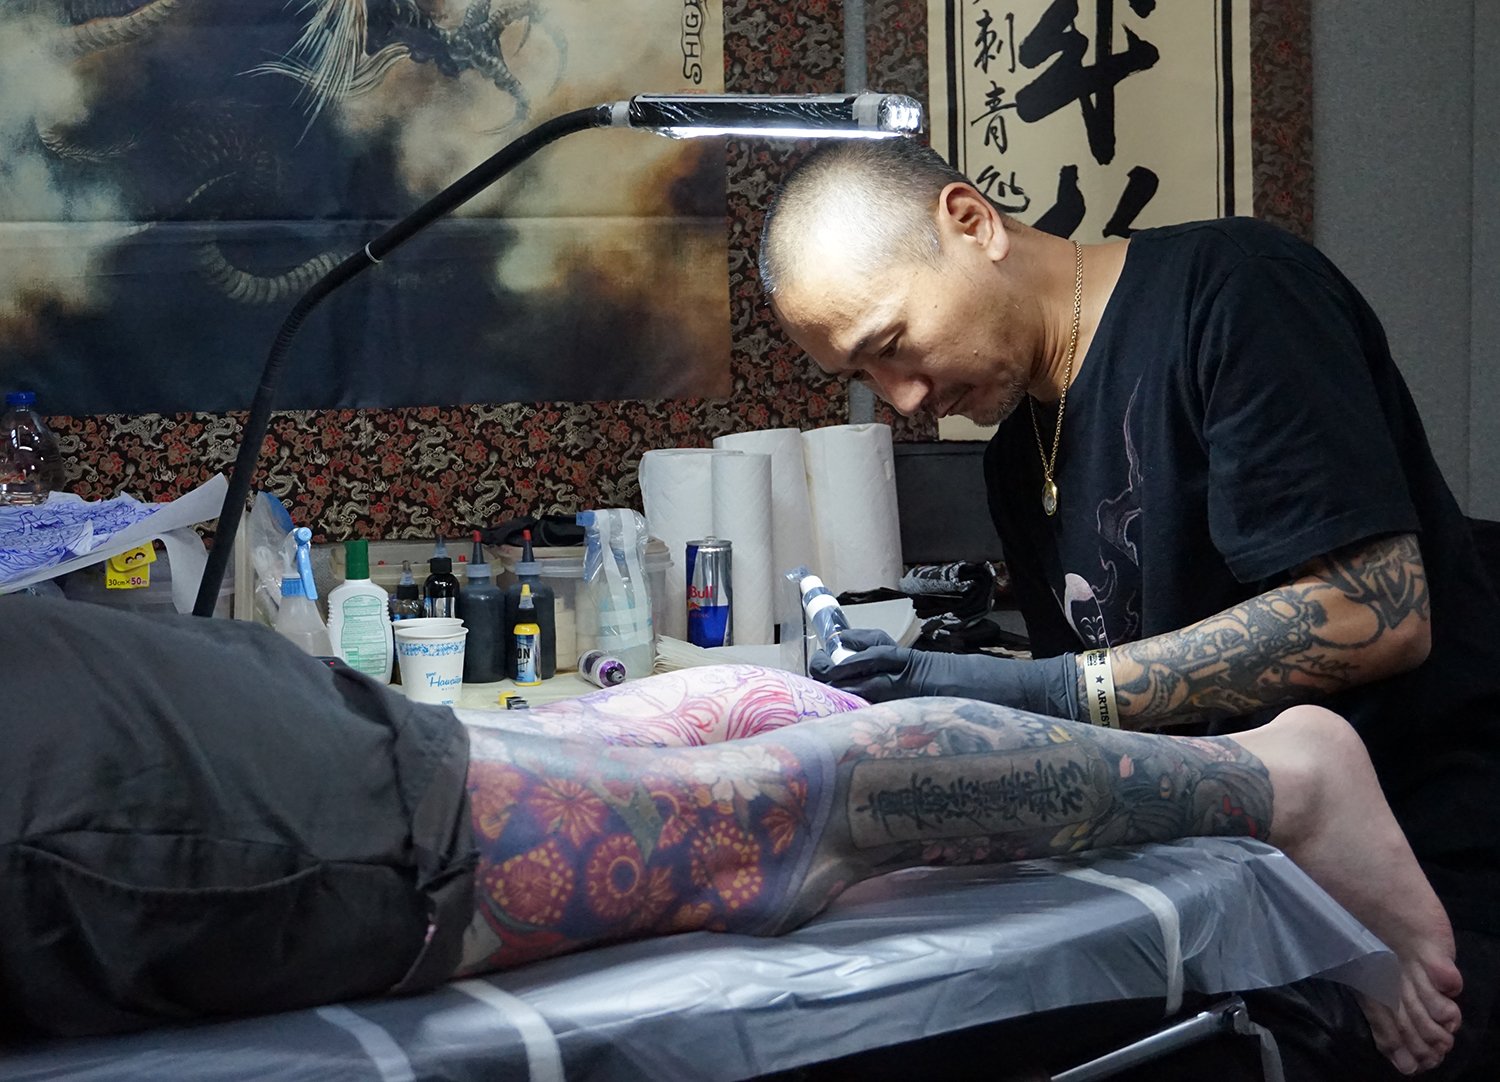 shige yellow blaze at the 2018 london tattoo convention